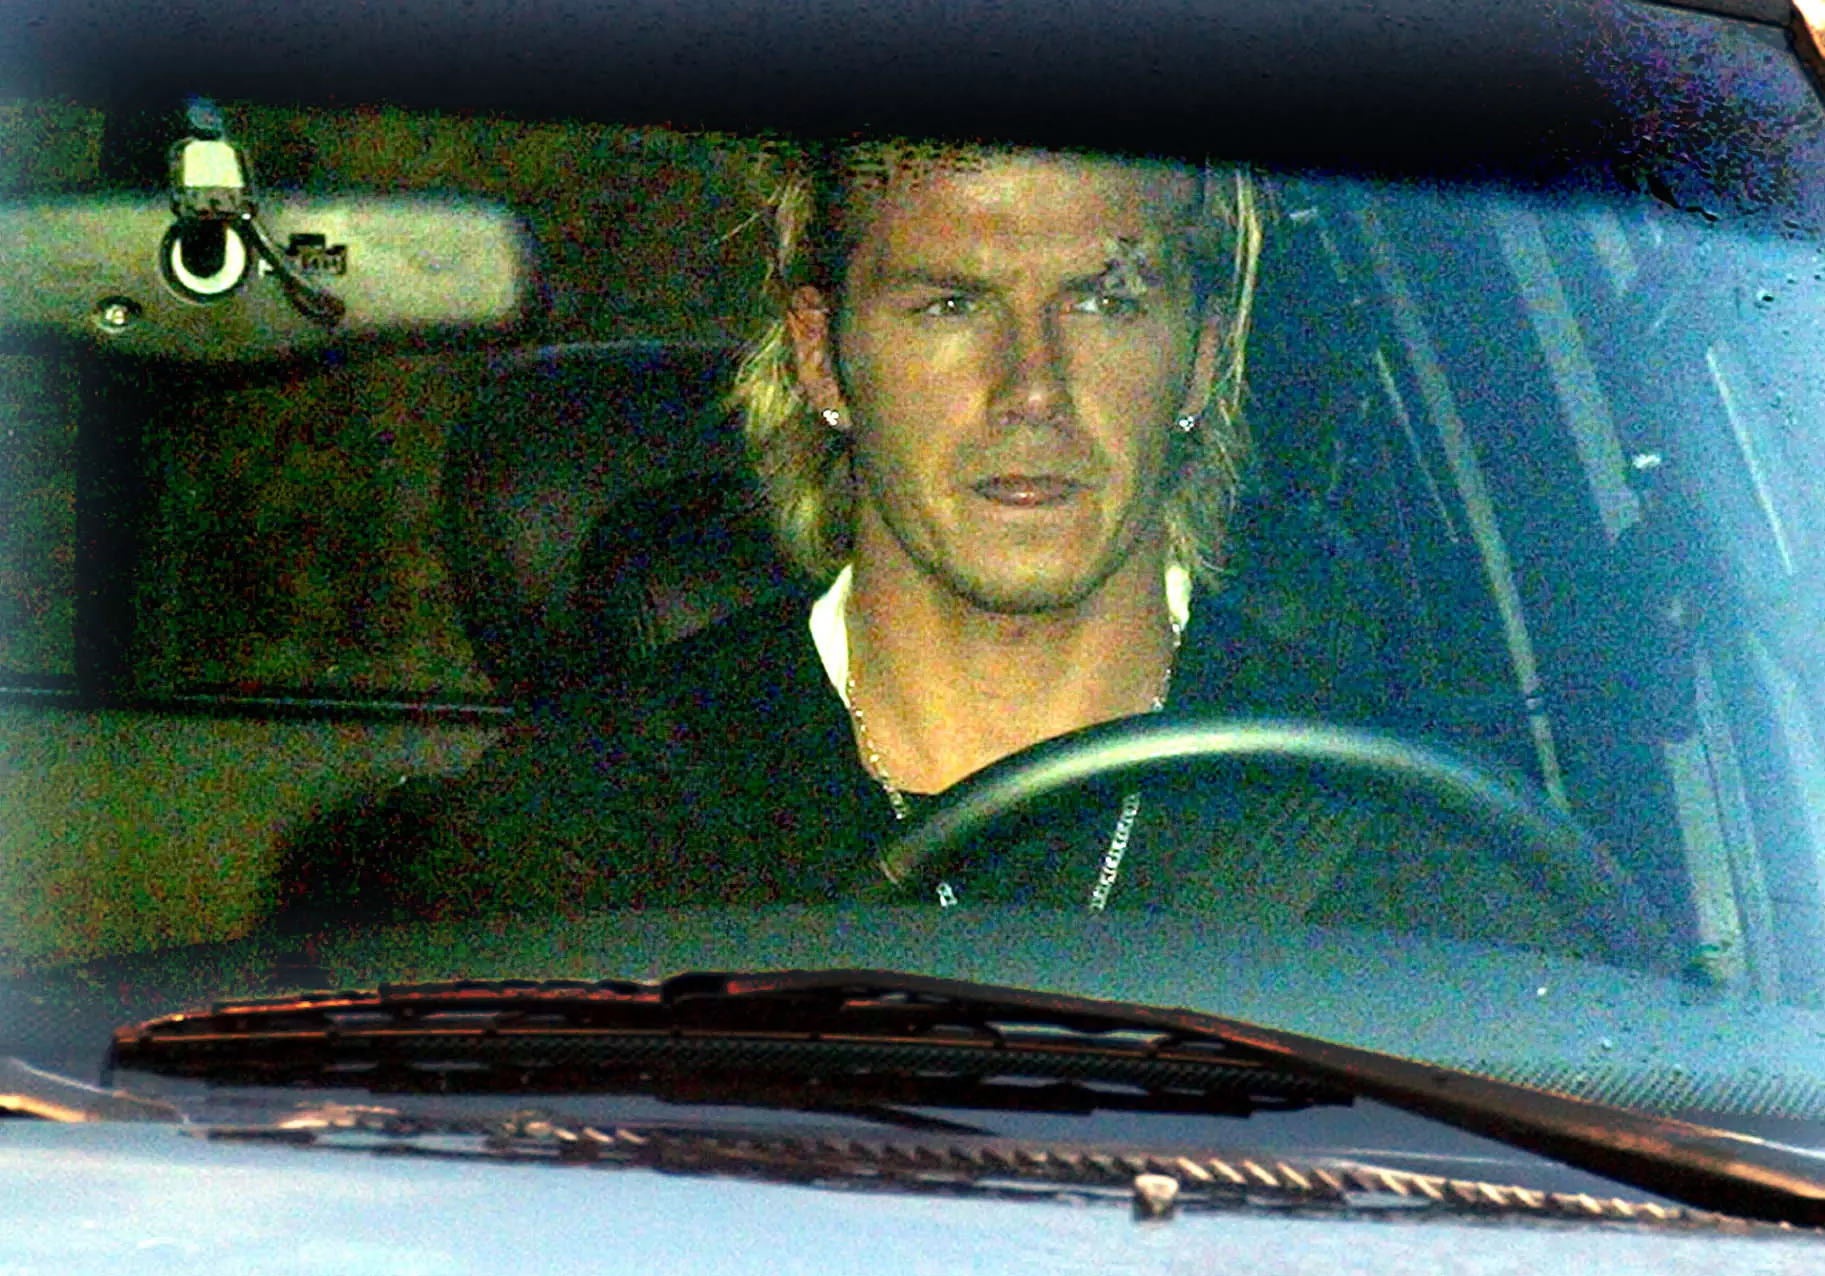 Beckham pictured after the incident. Image: PA Images